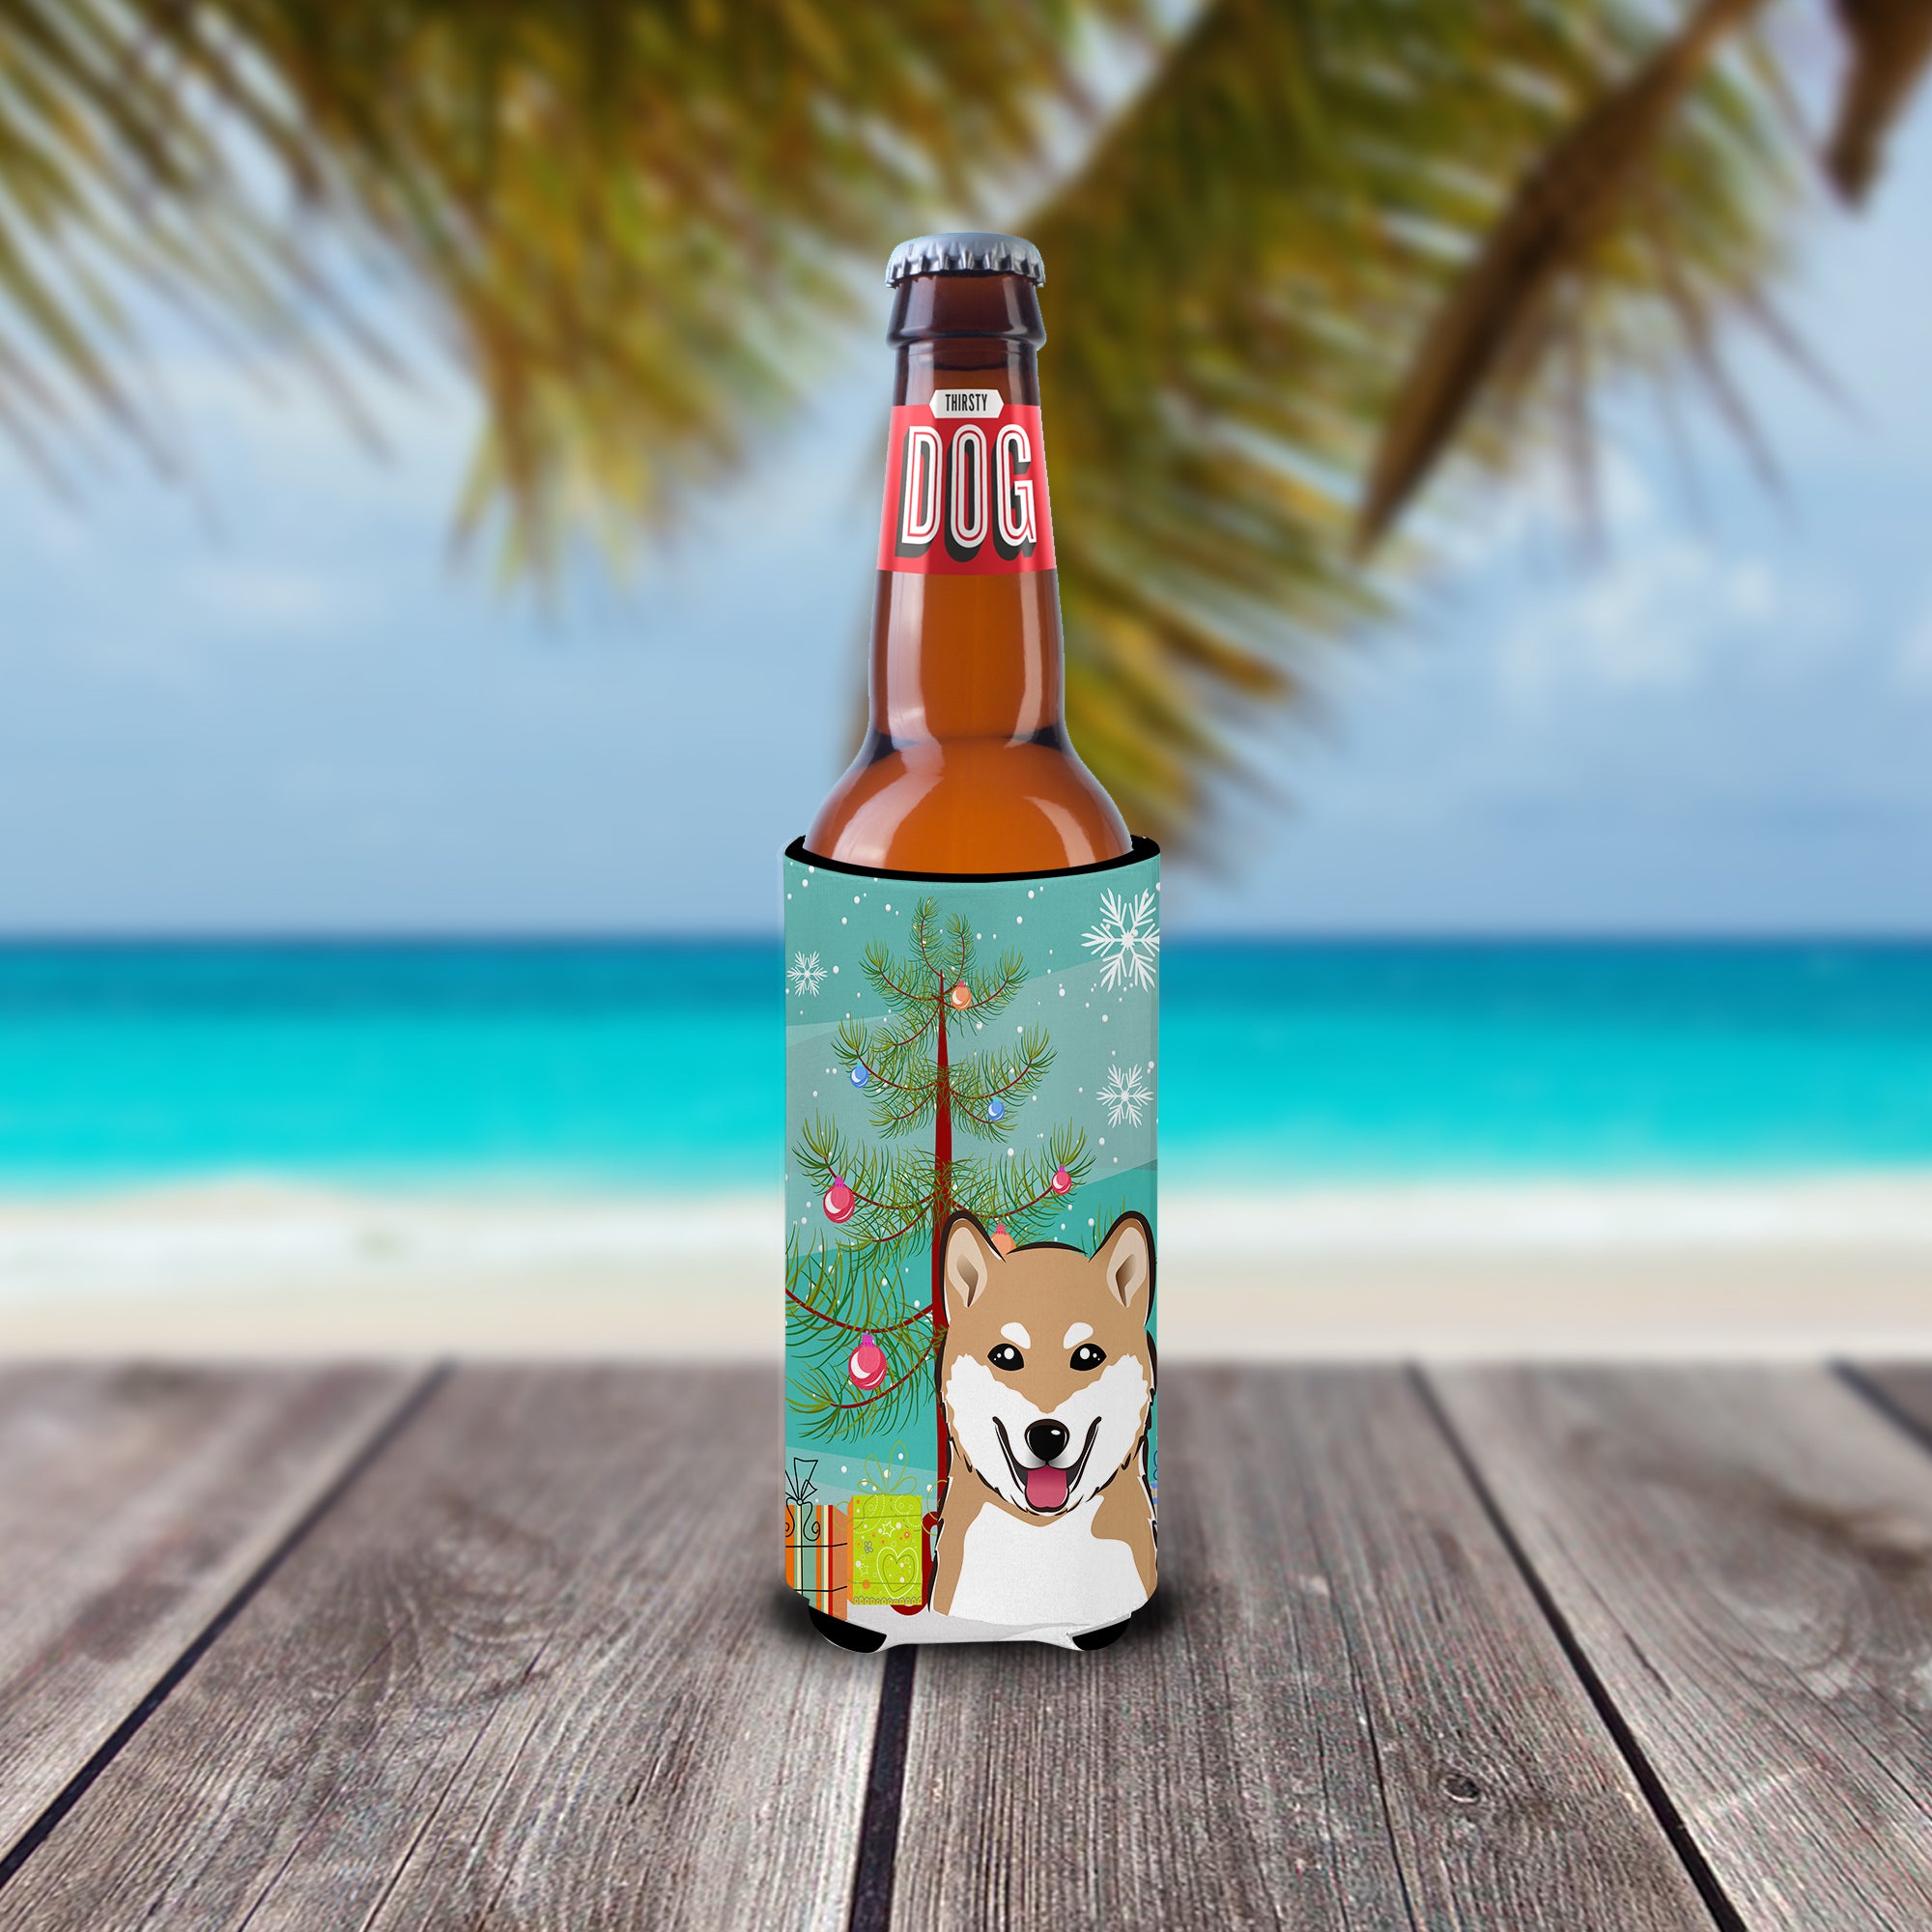 Christmas Tree and Shiba Inu Ultra Beverage Insulators for slim cans BB1597MUK